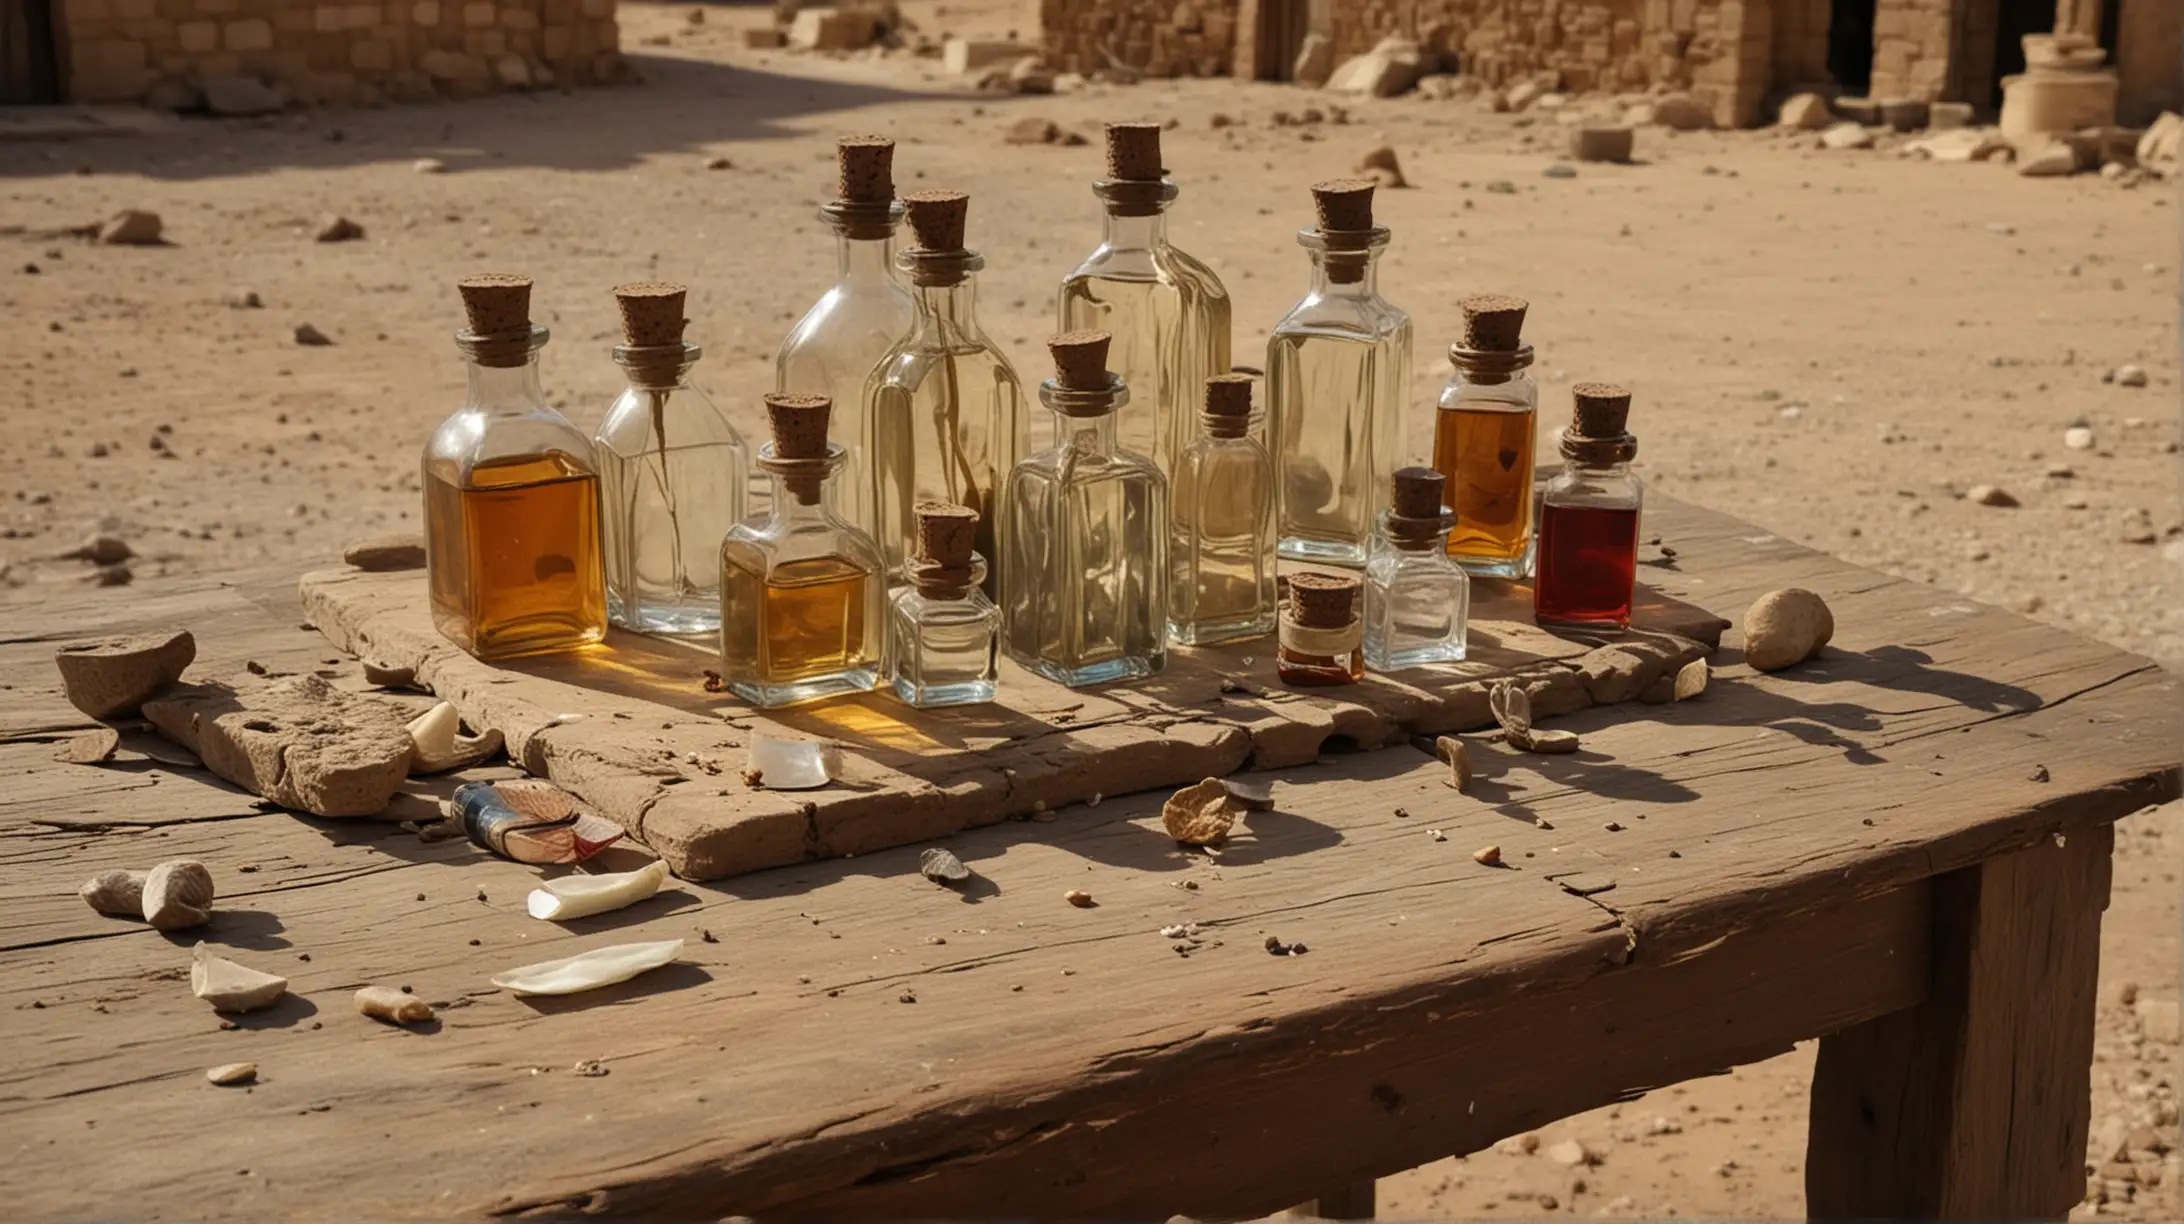 Ancient Perfume Bottles and Anointing Oil on Old Table in Biblical Desert Village